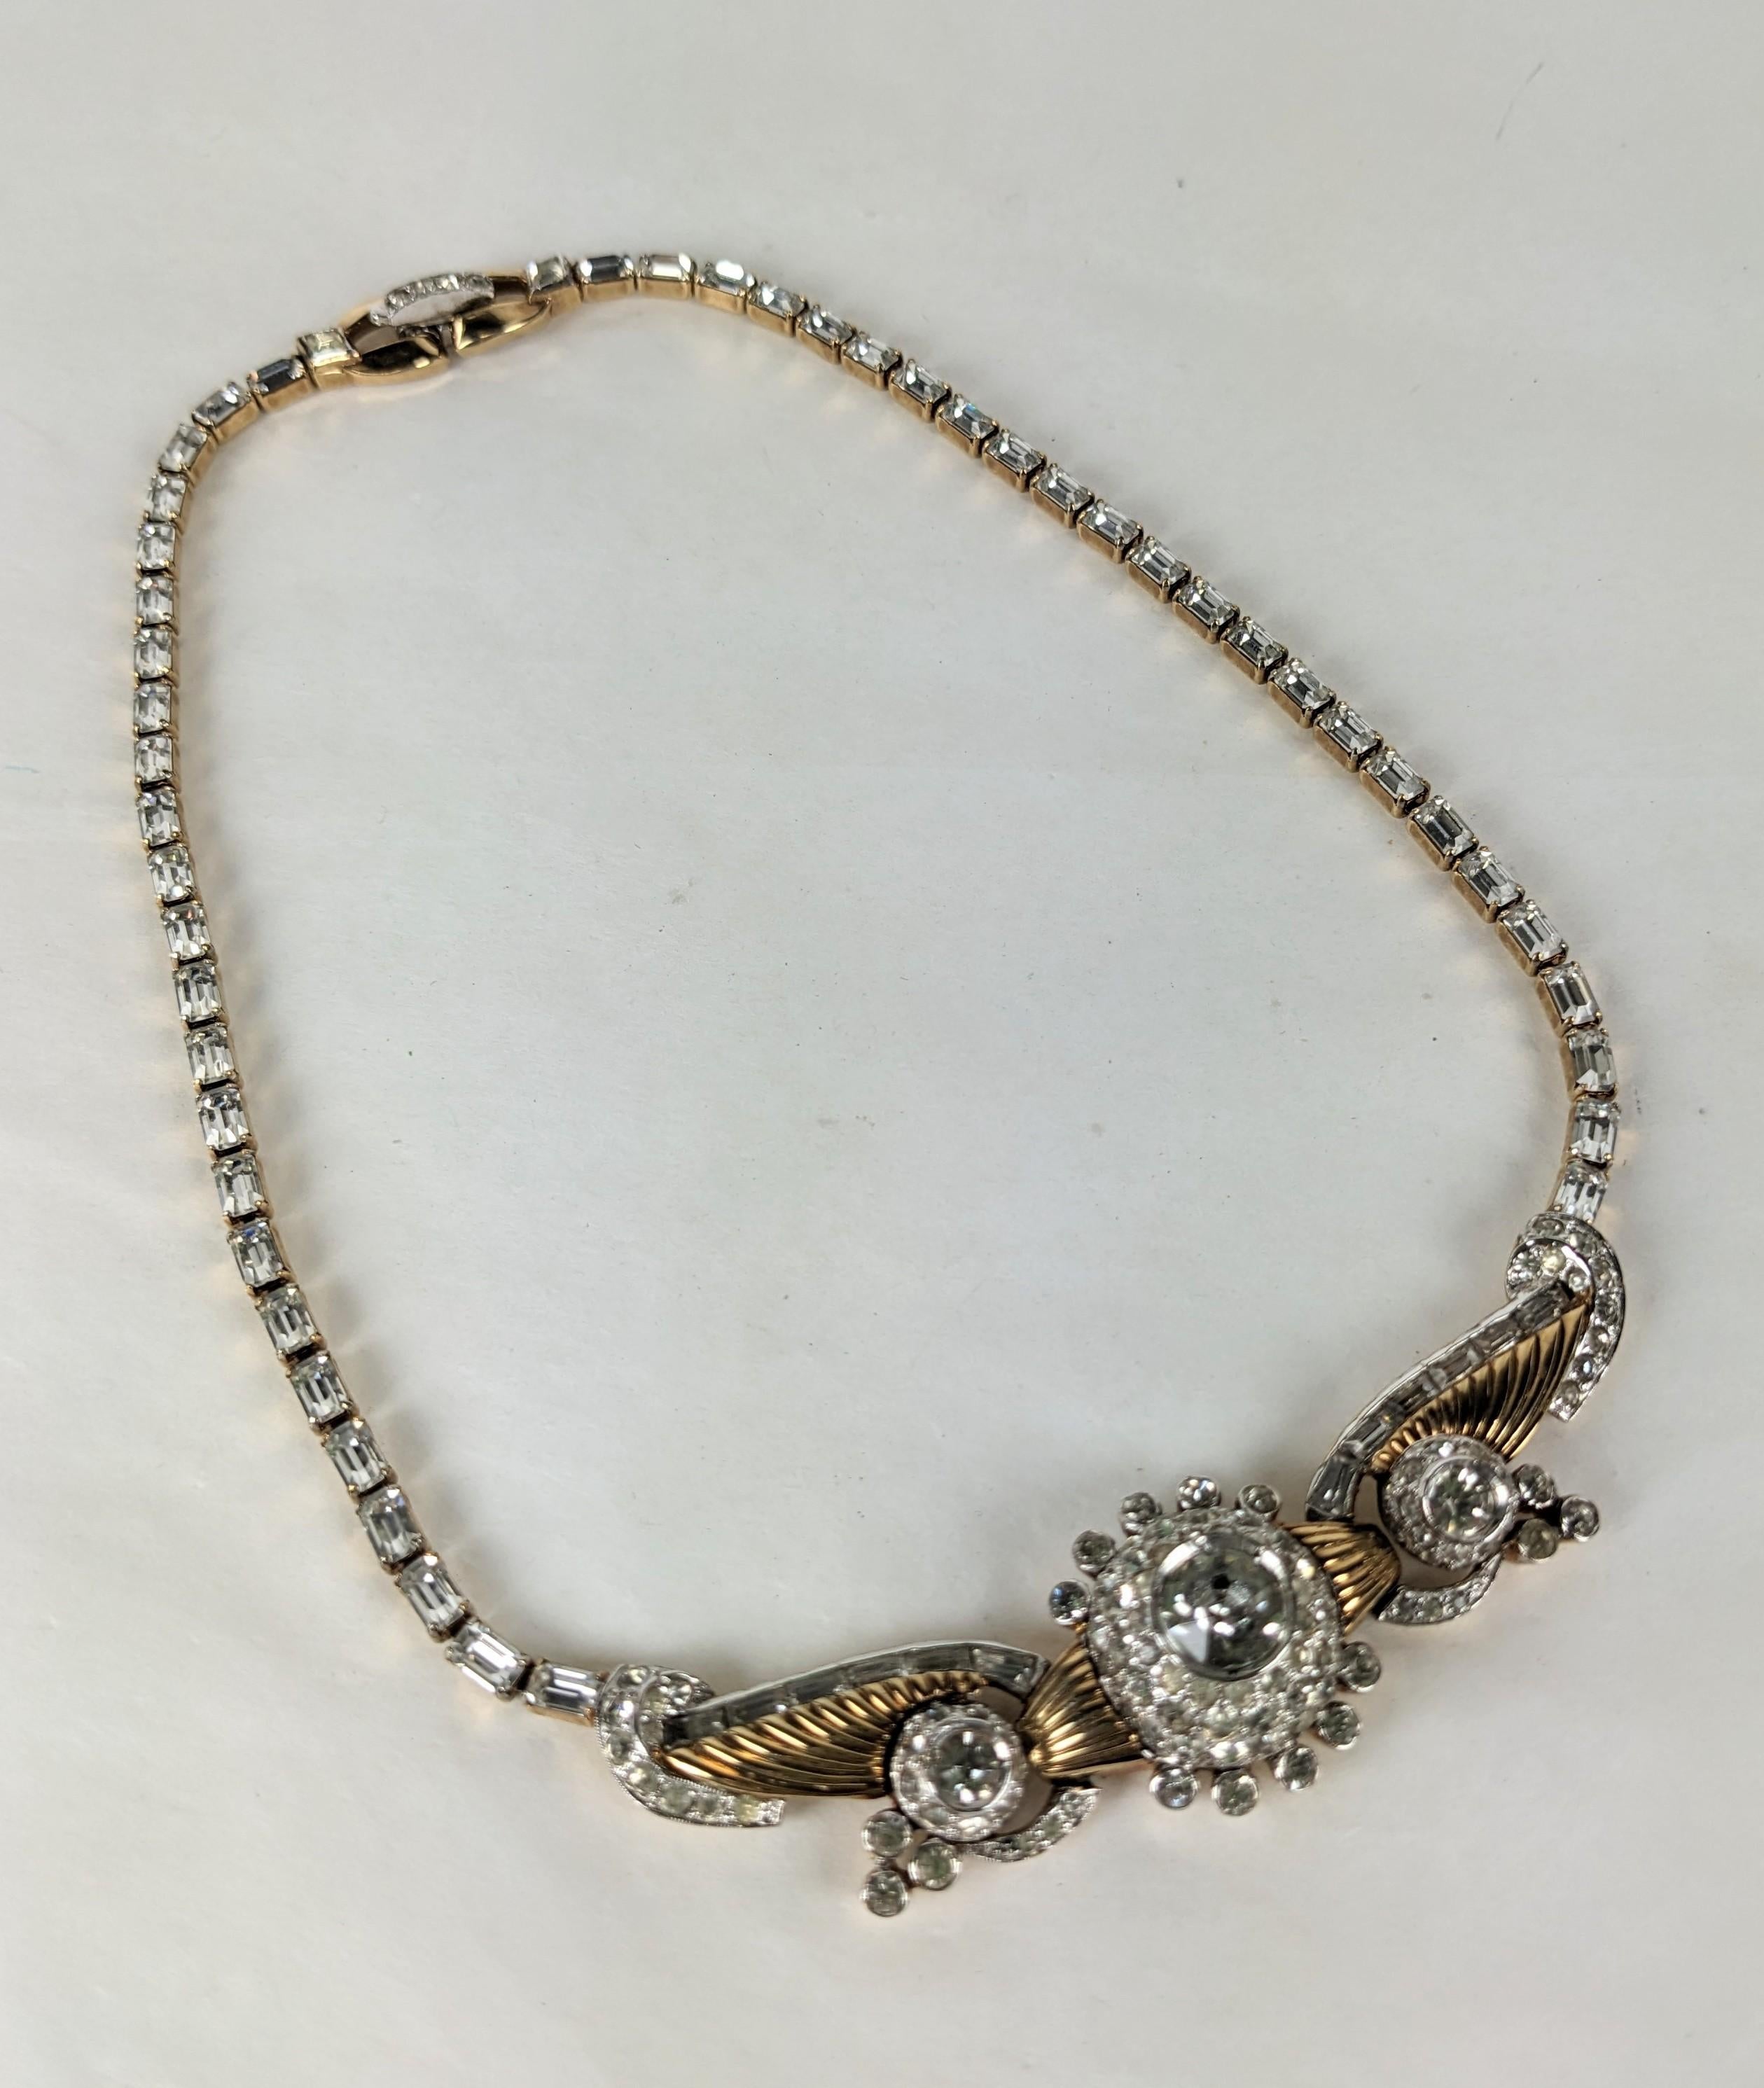 Lovely Mazer Retro Gold and Paste Necklace from the 1940's. Central motif of ribbed gold and rhinestone pastes on a baguette link chain. Signed on clasp. 1940's USA. 16